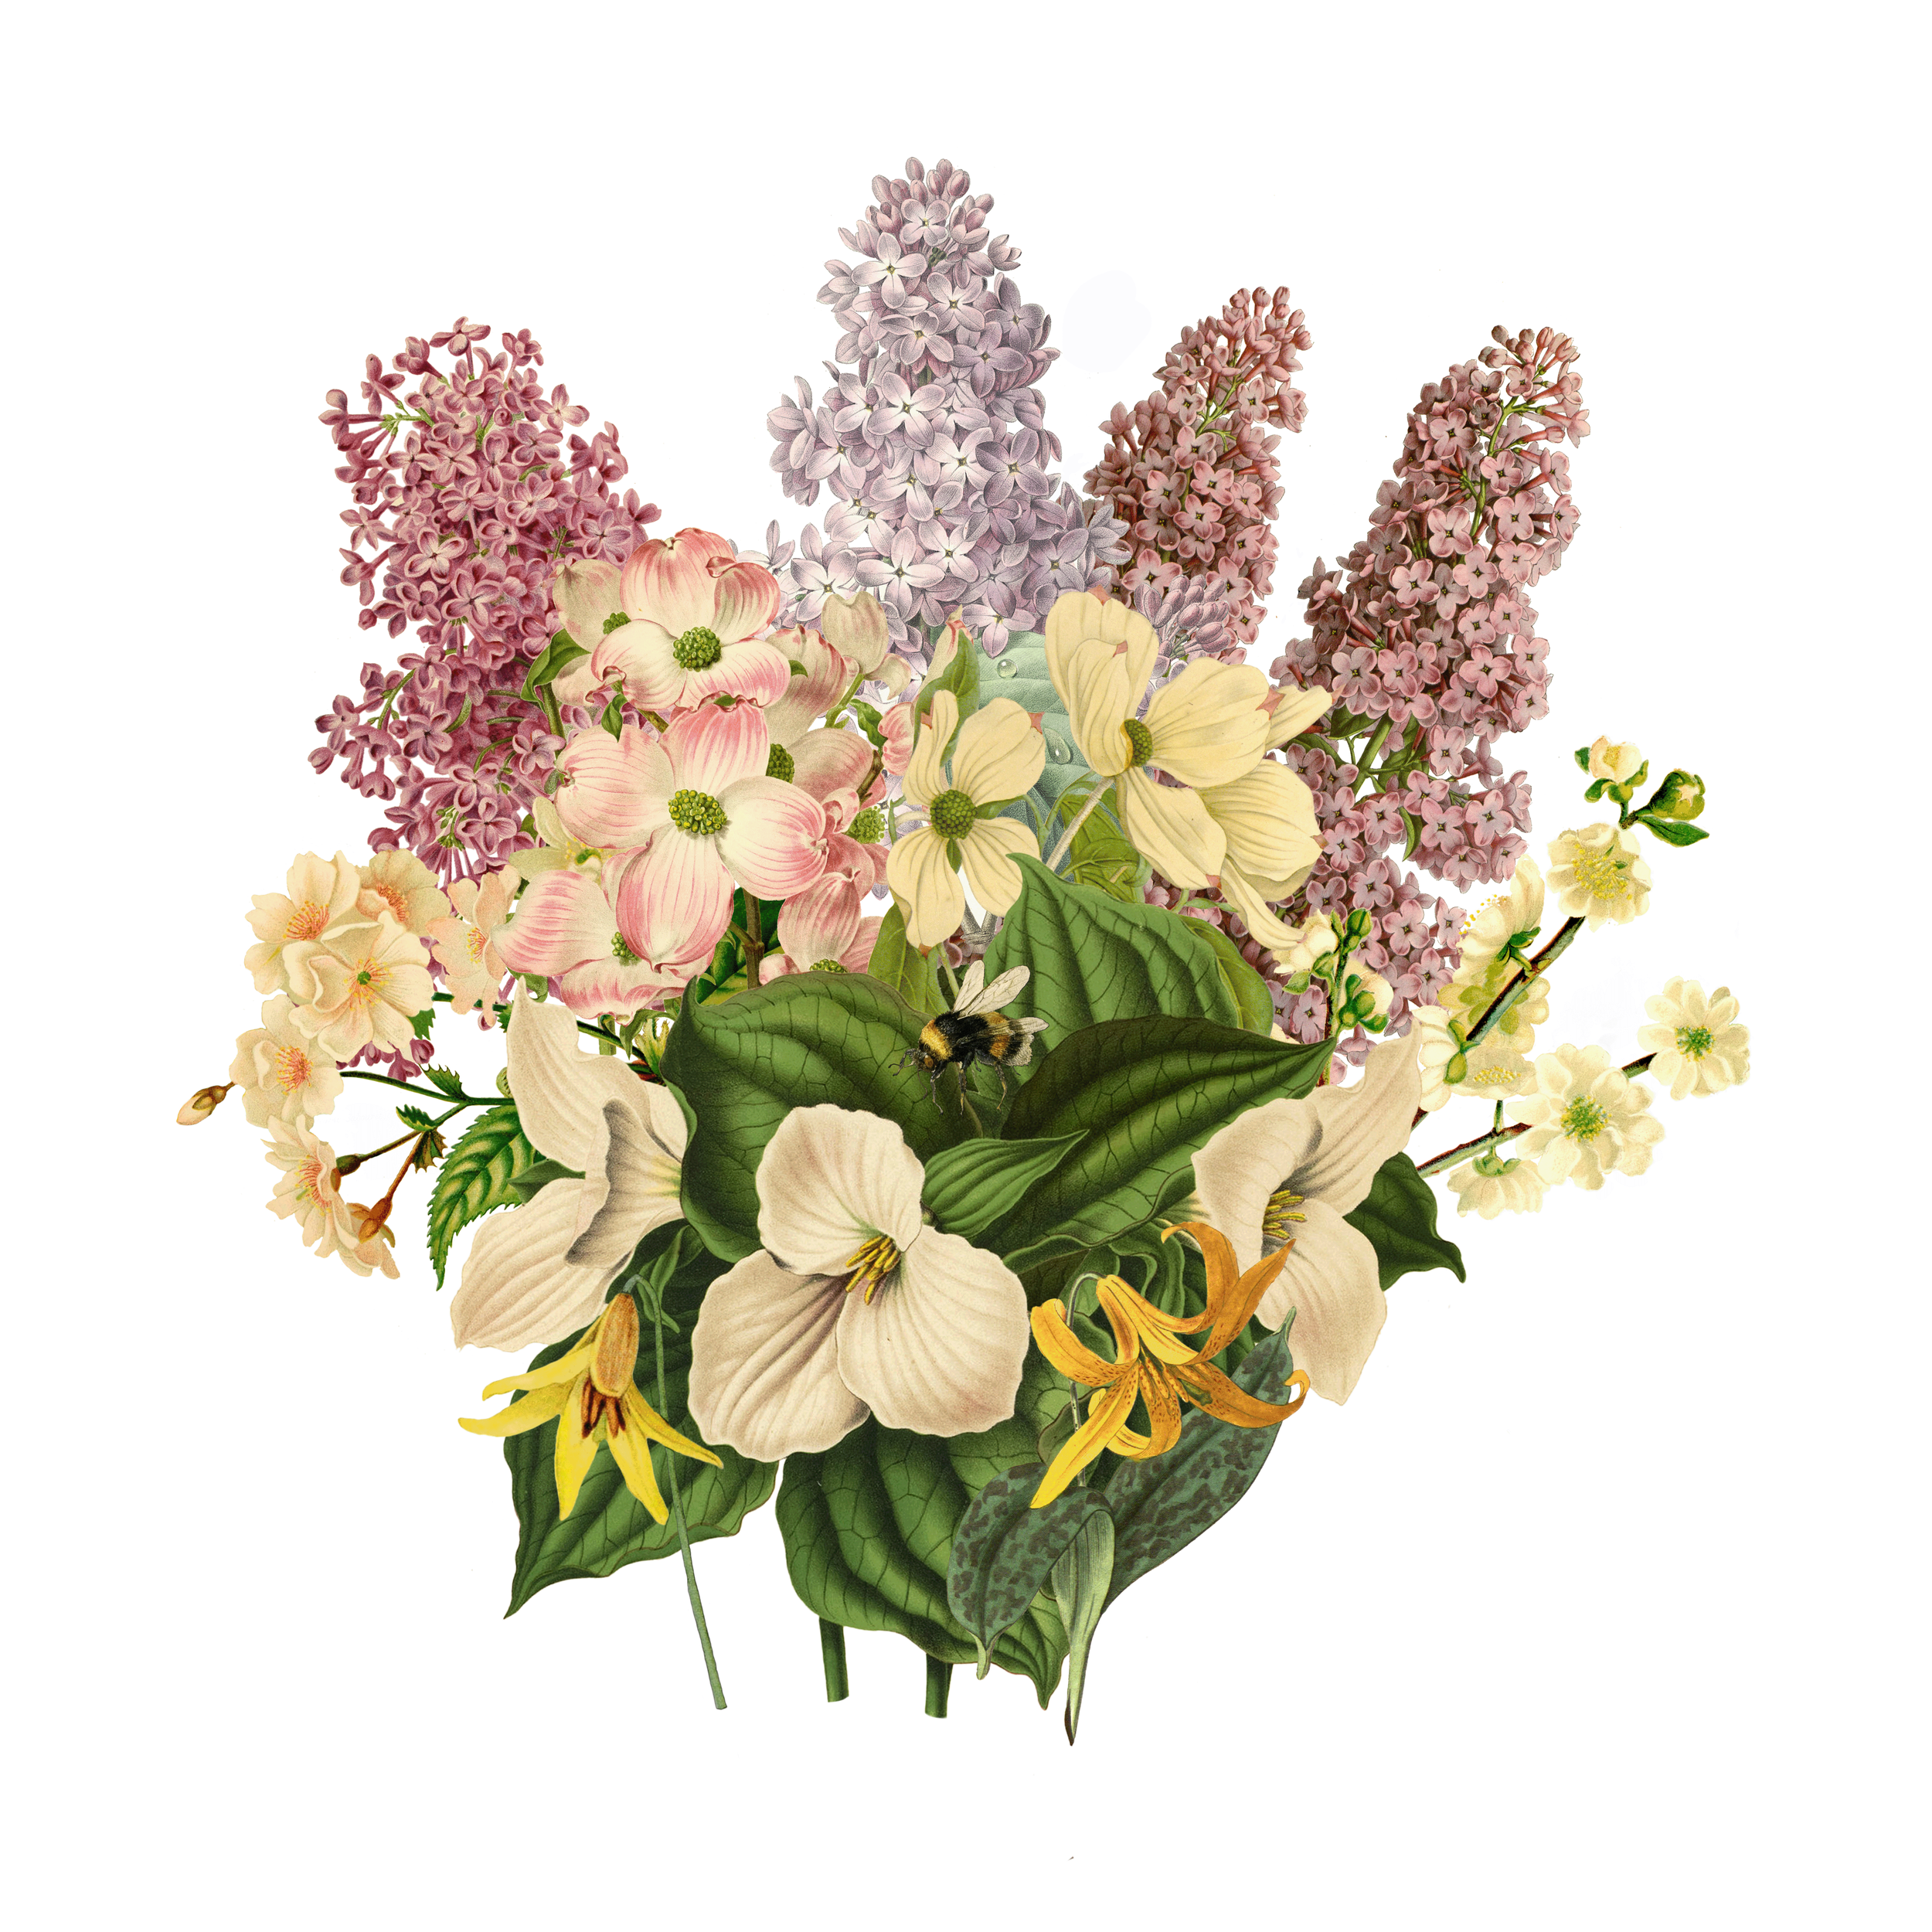 A spring woodland bouquet including trillium, dogwood, lilac, dog-tooth violet and, of course, our native bumble bee.